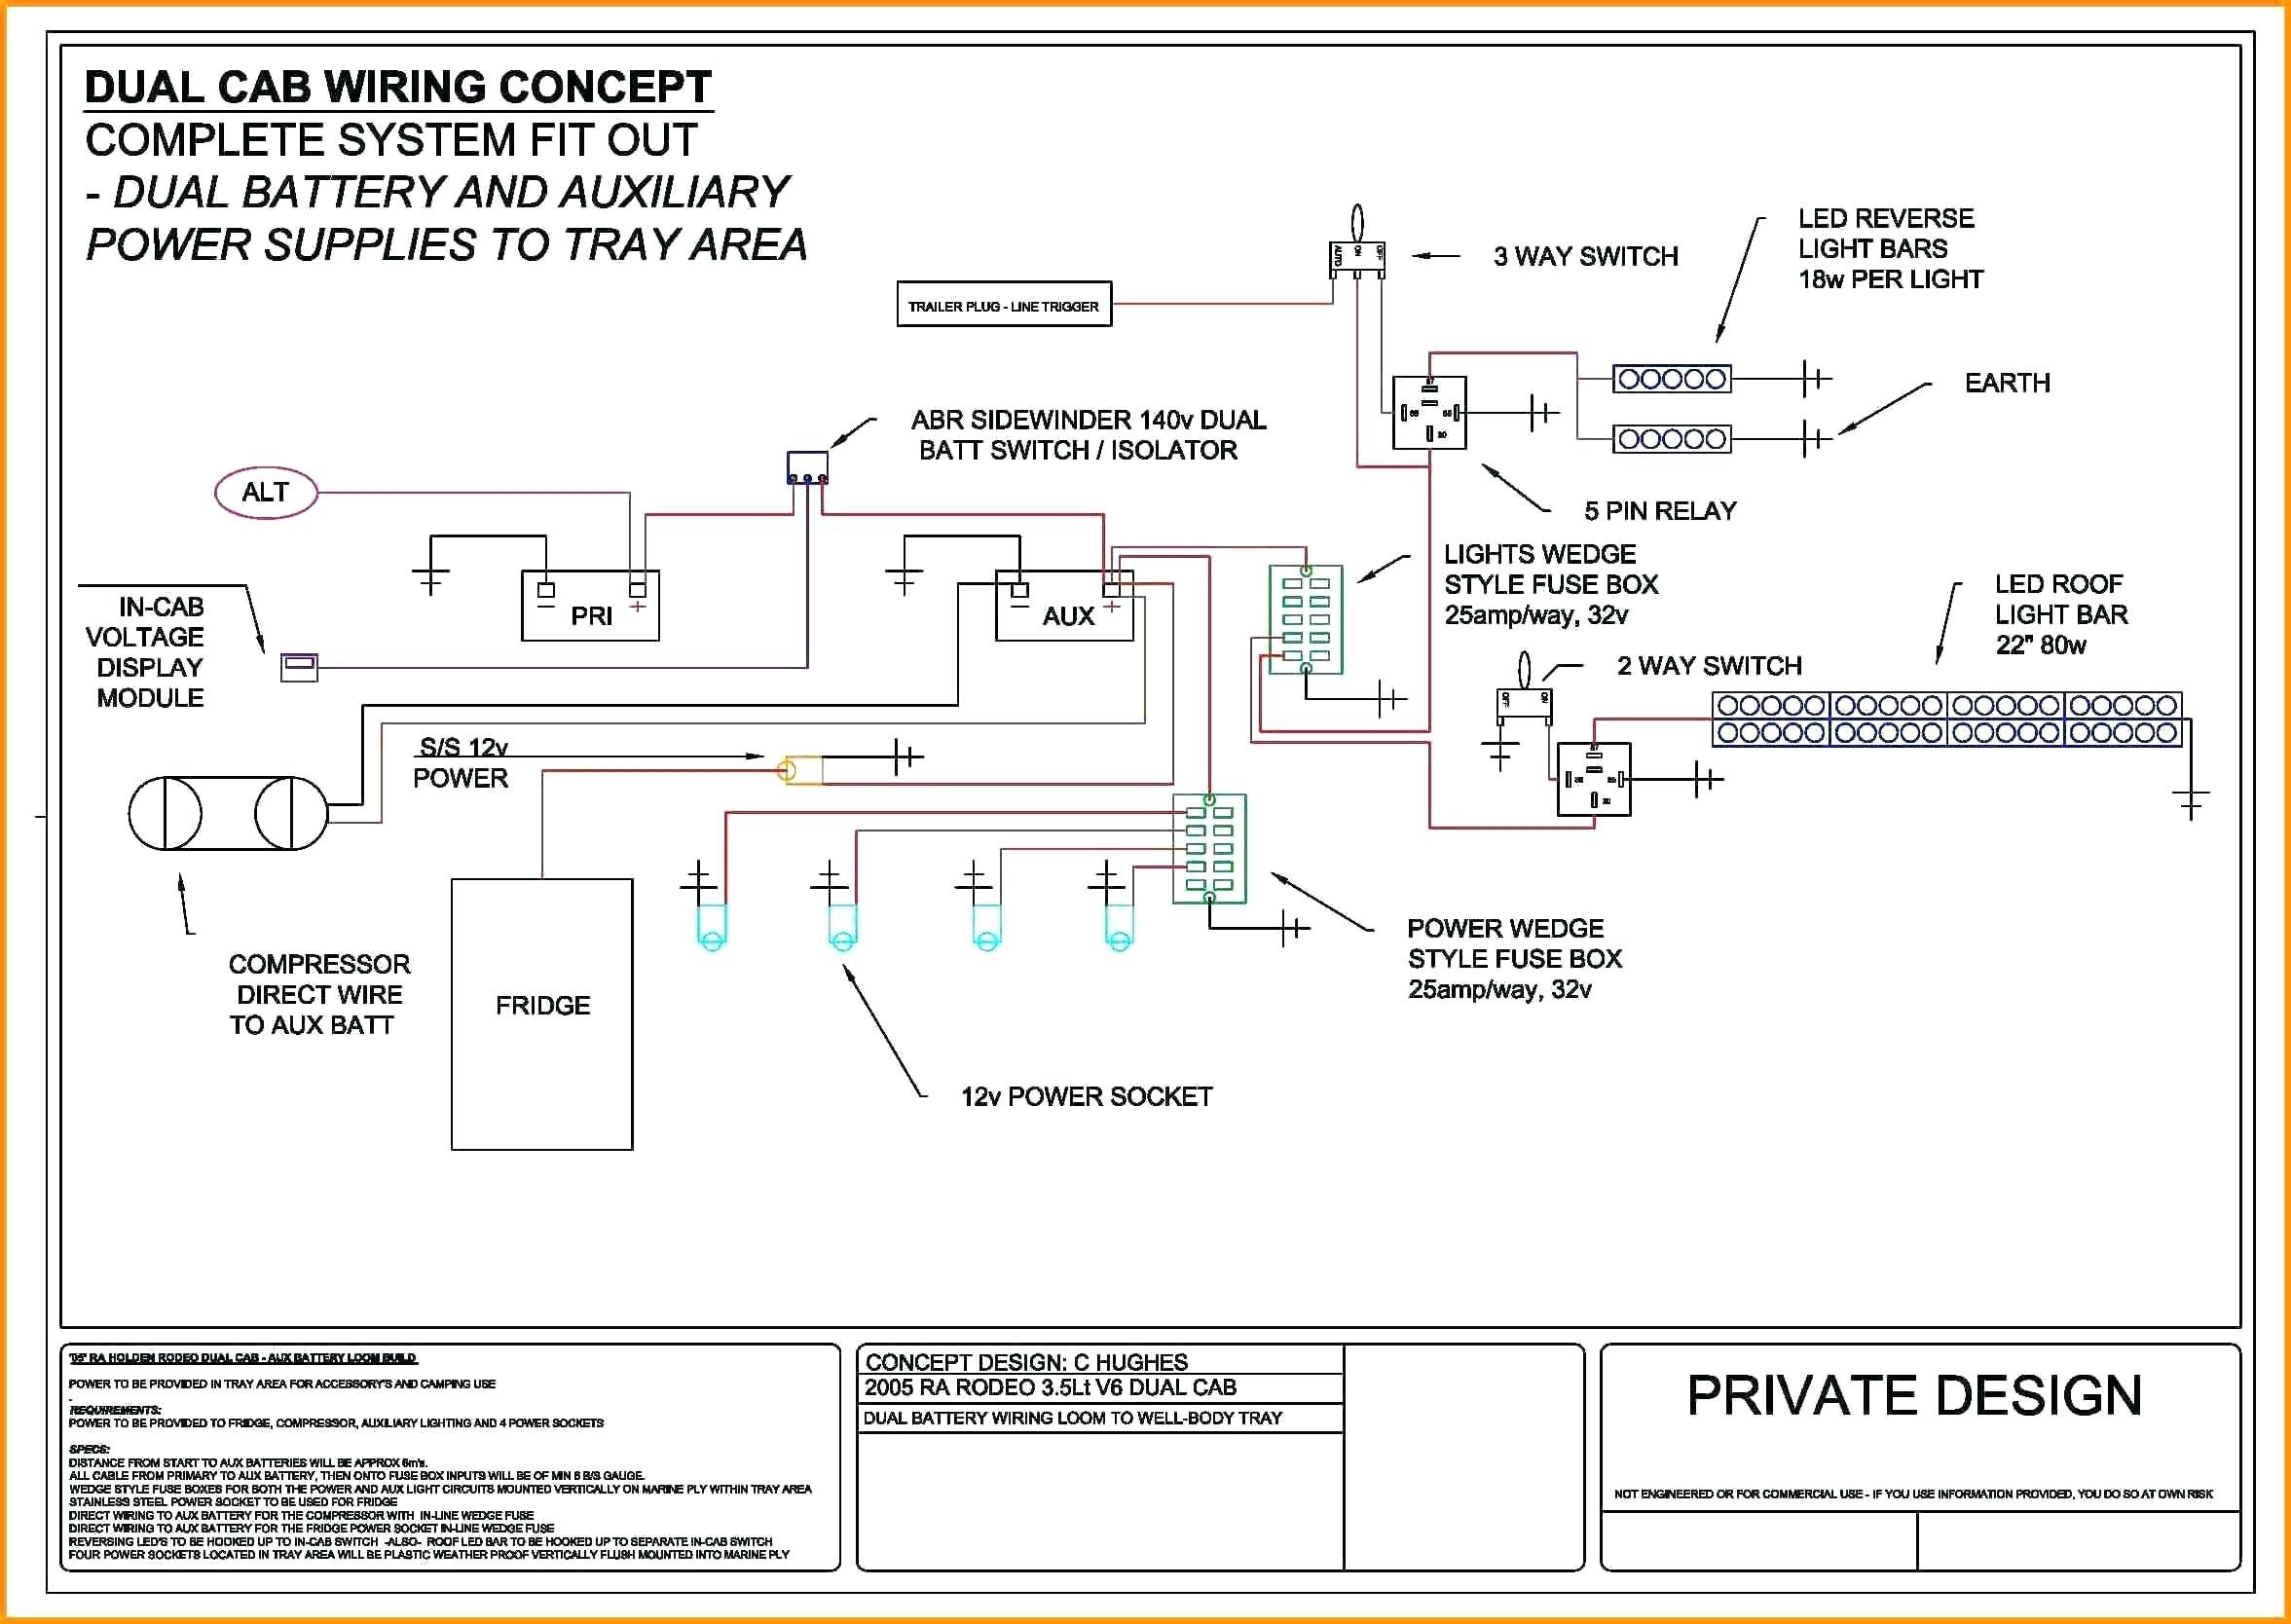 Wiring Diagram for Amp Installation Refrence Lovely 200 Amp Meter Base Wiring Diagram Diagram